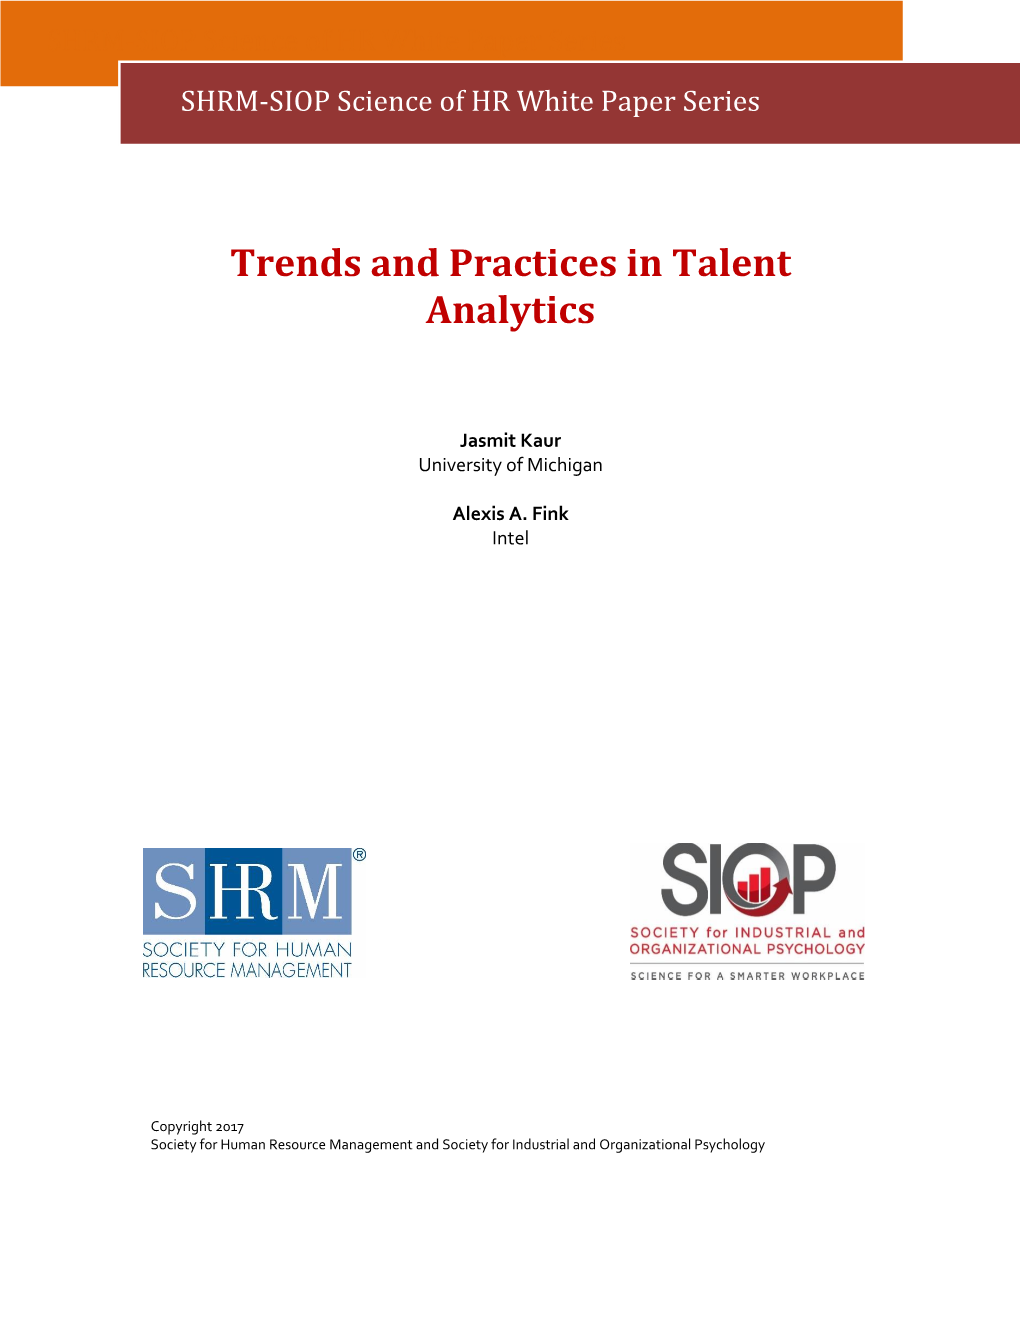 Trends and Practices in Talent Analytics